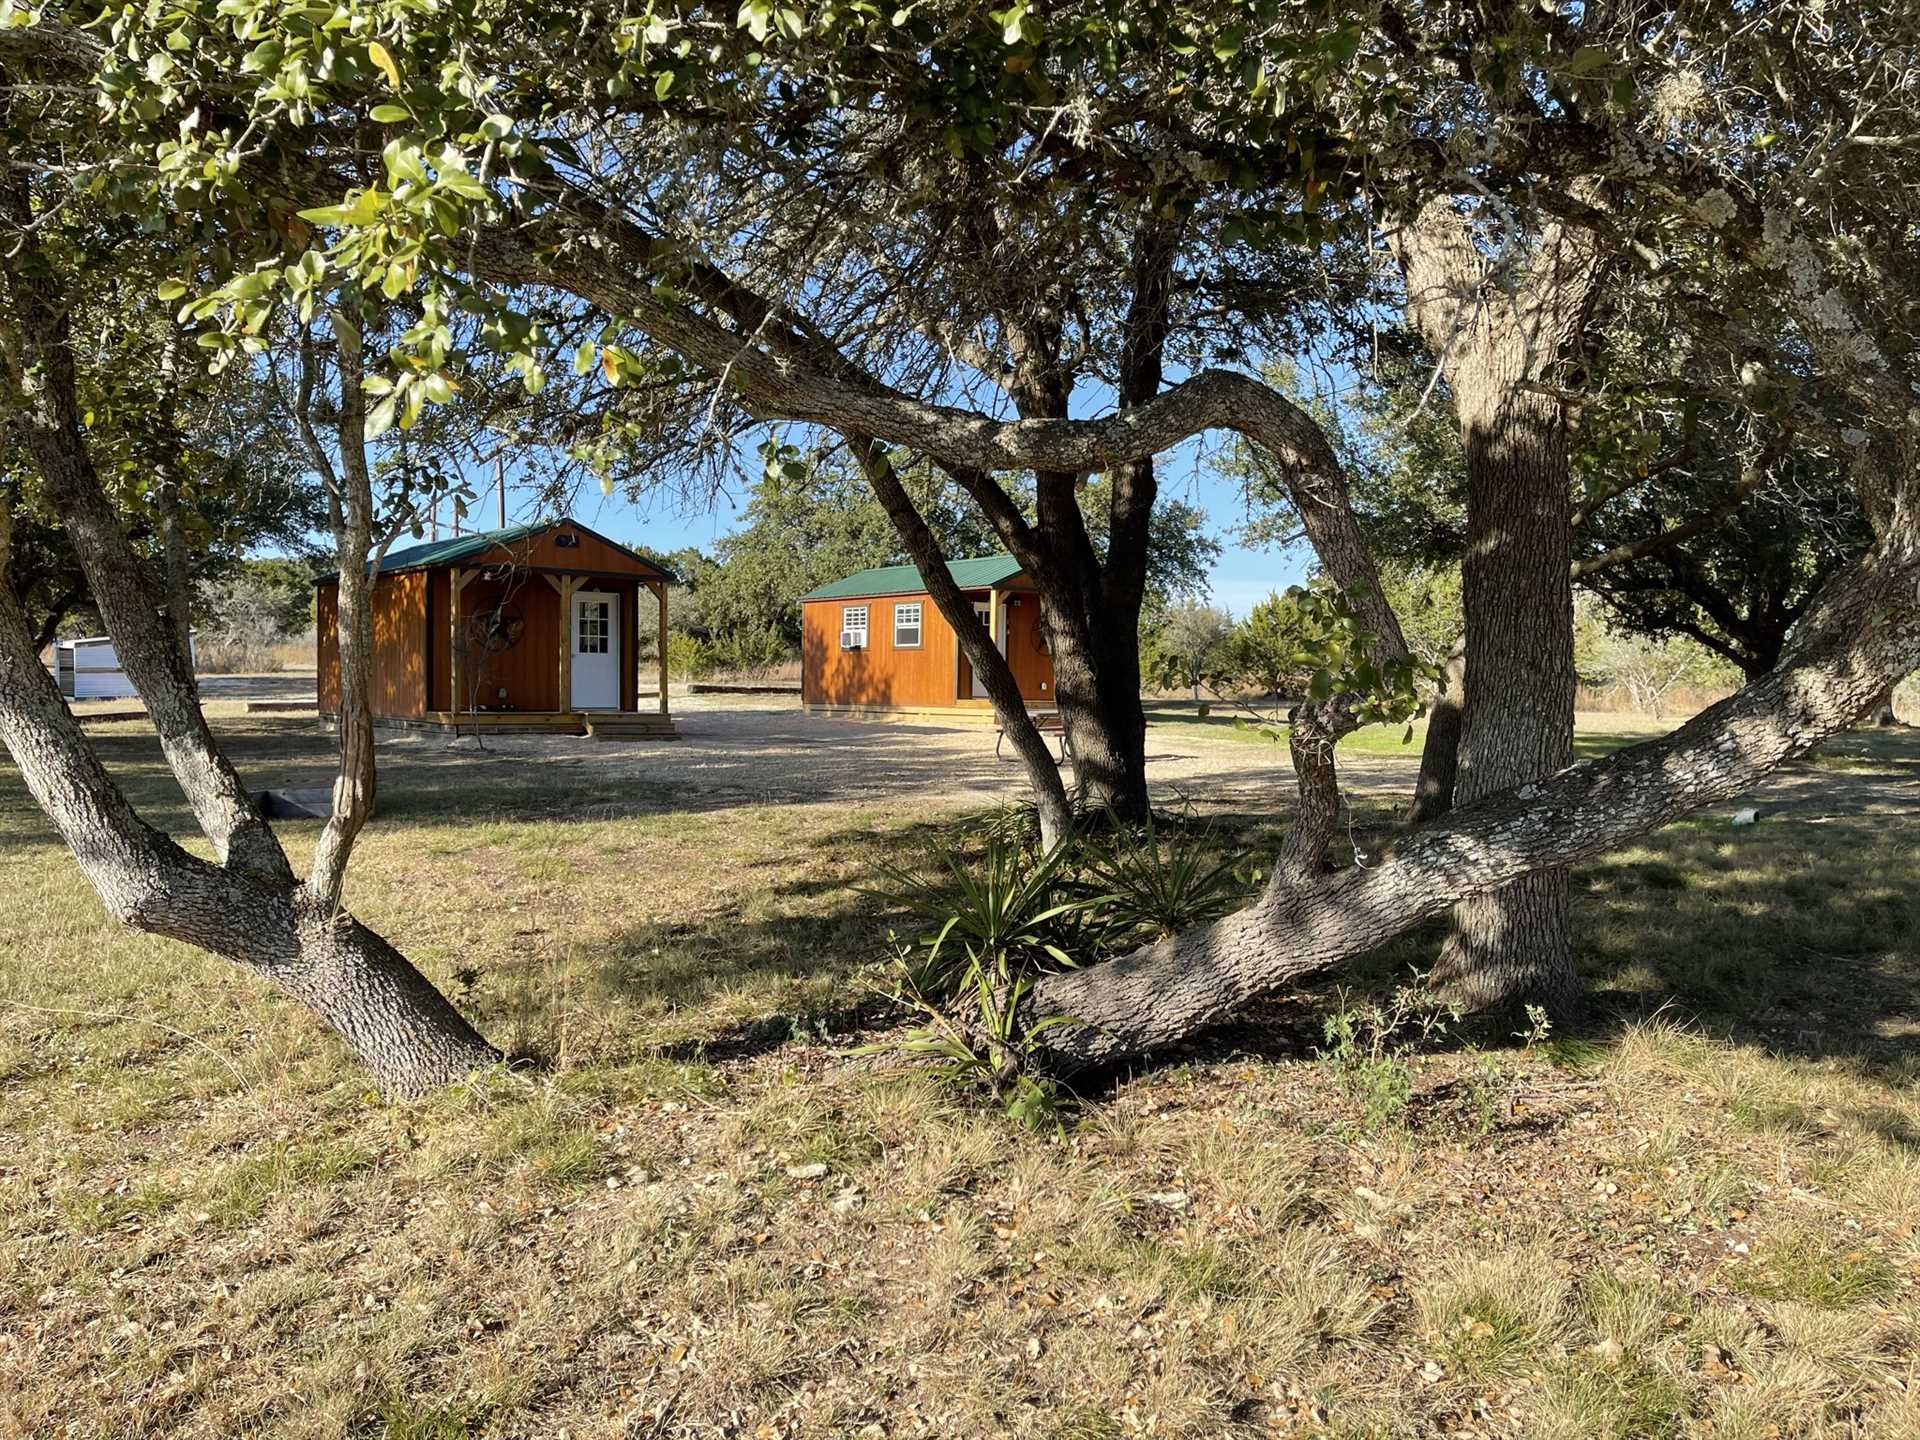                                                 If you need holiday space for up to ten people, keep in mind there are three cabins at Great Heart Ranch you can book, ask us for details!